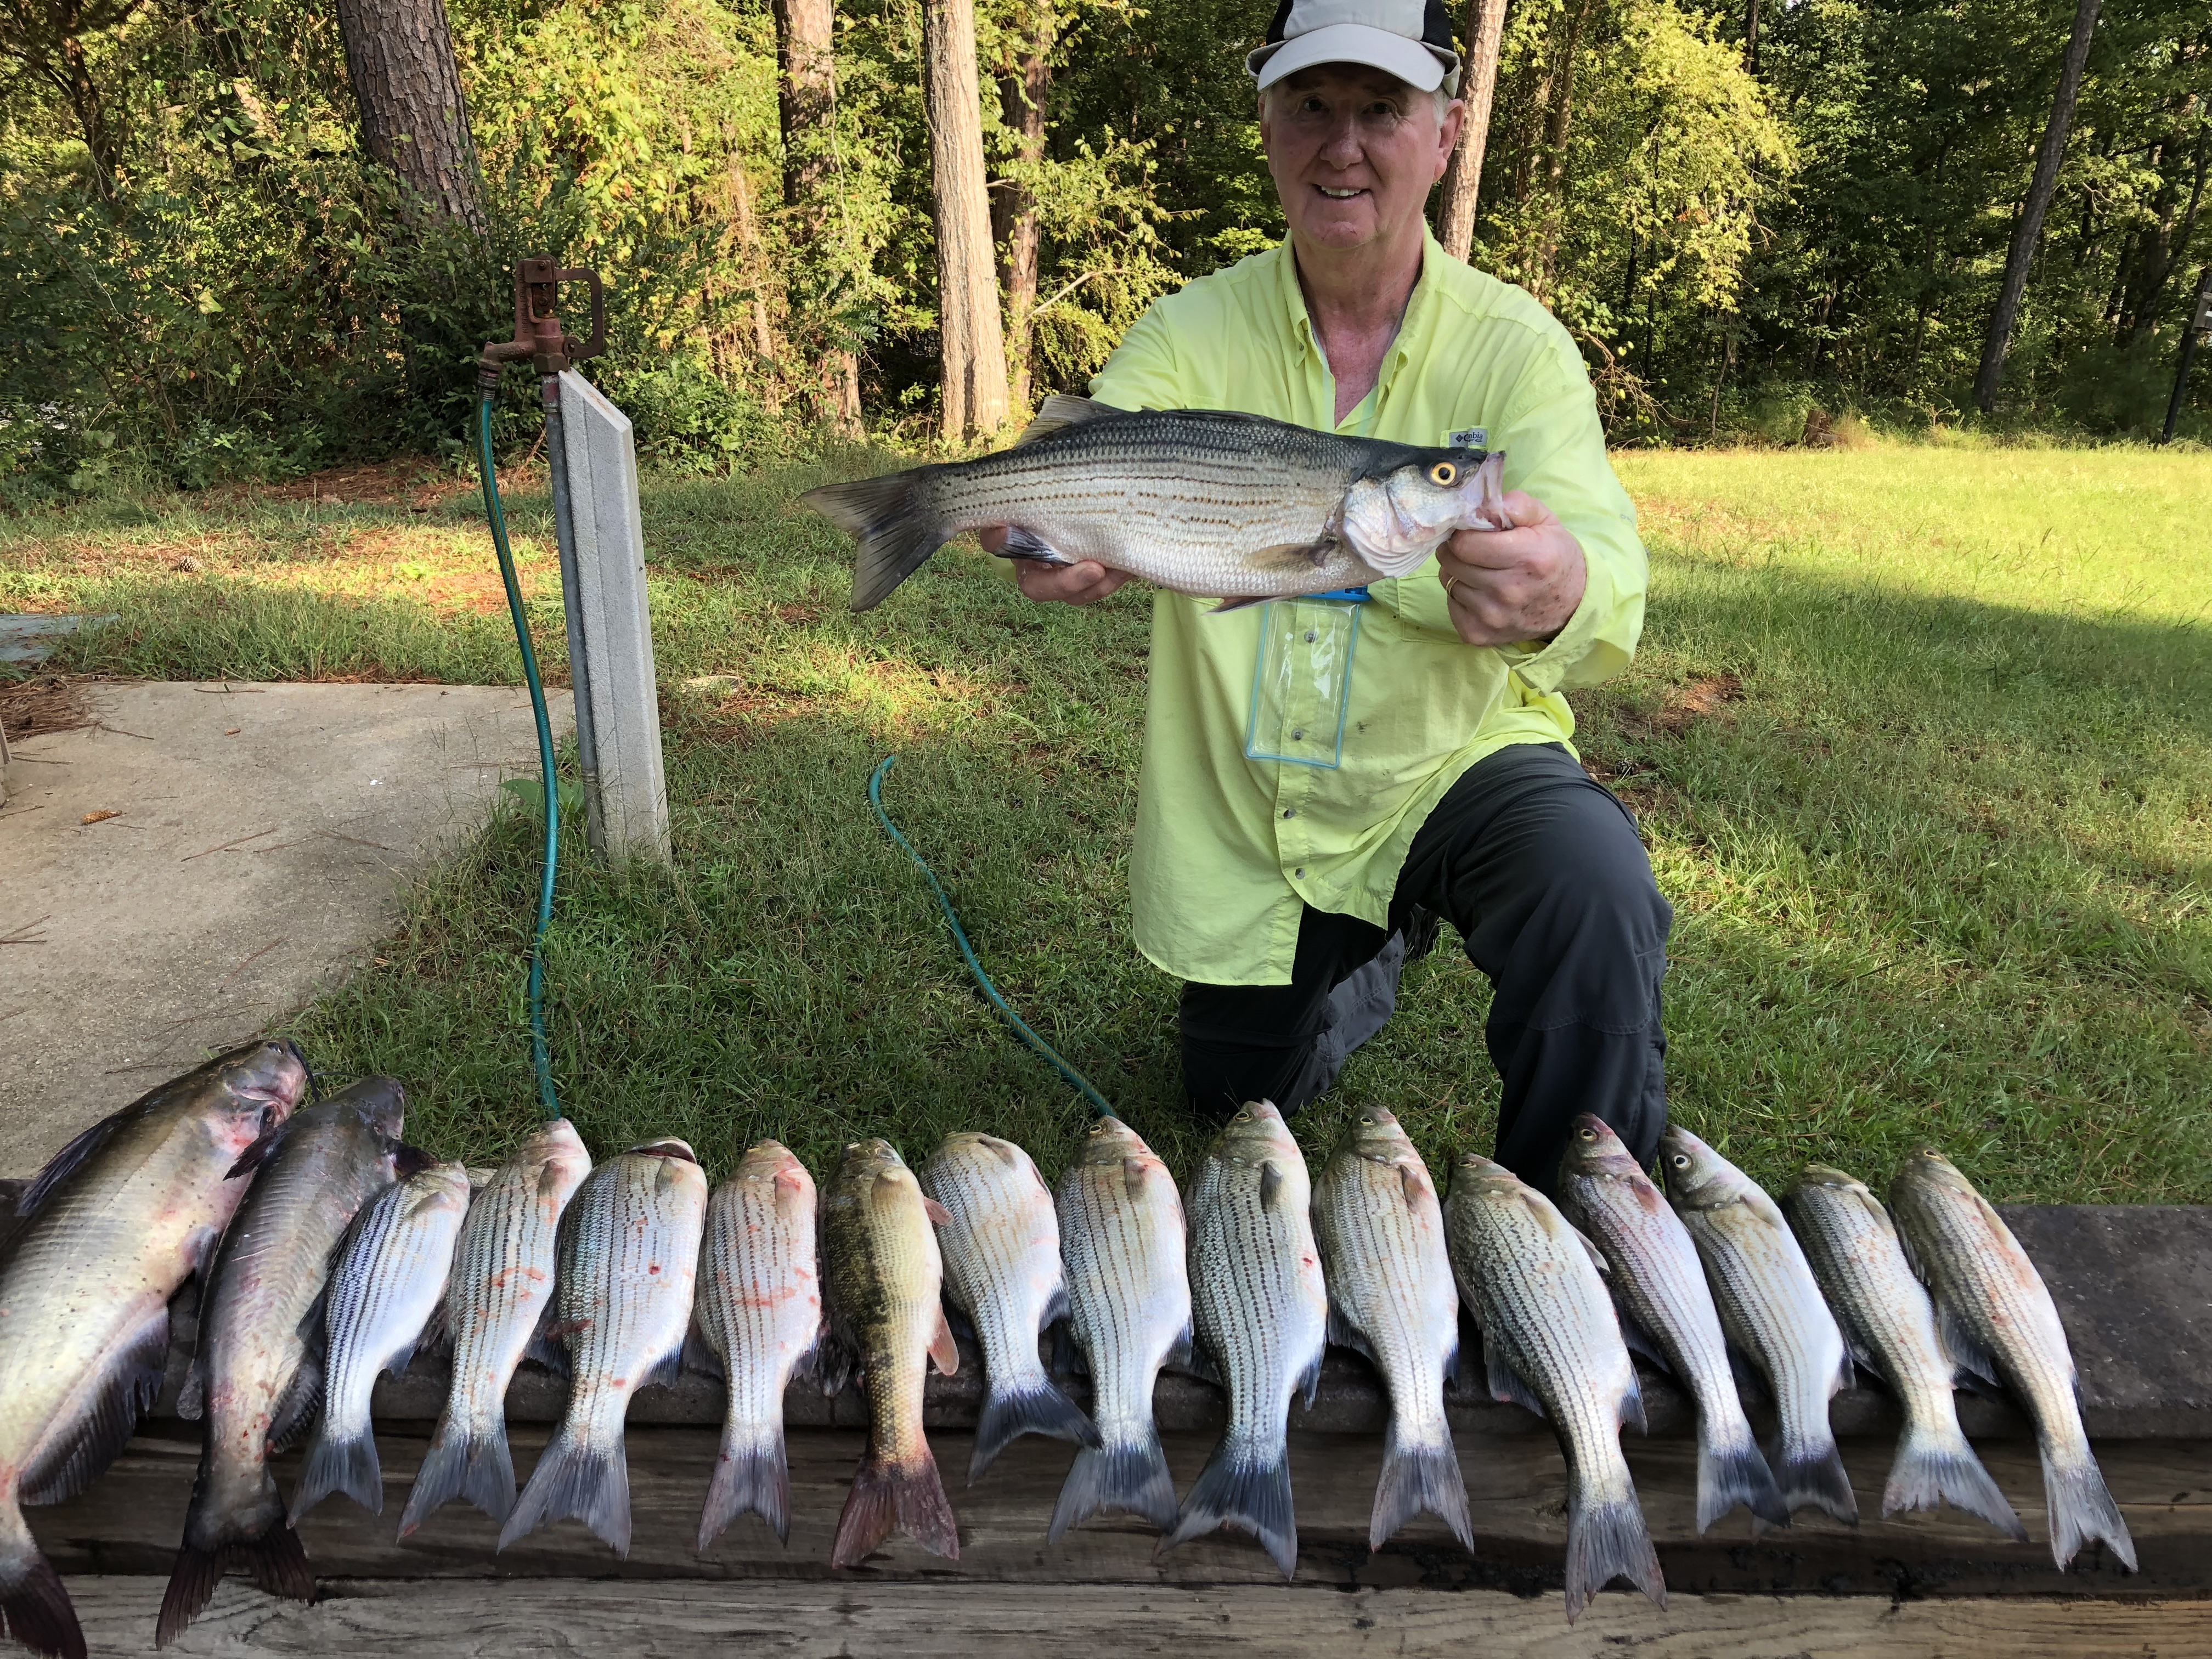 Oct. 3, 2018 Glenn Gray of Evans, Ga. with his nice catch of fish.IMG_2374